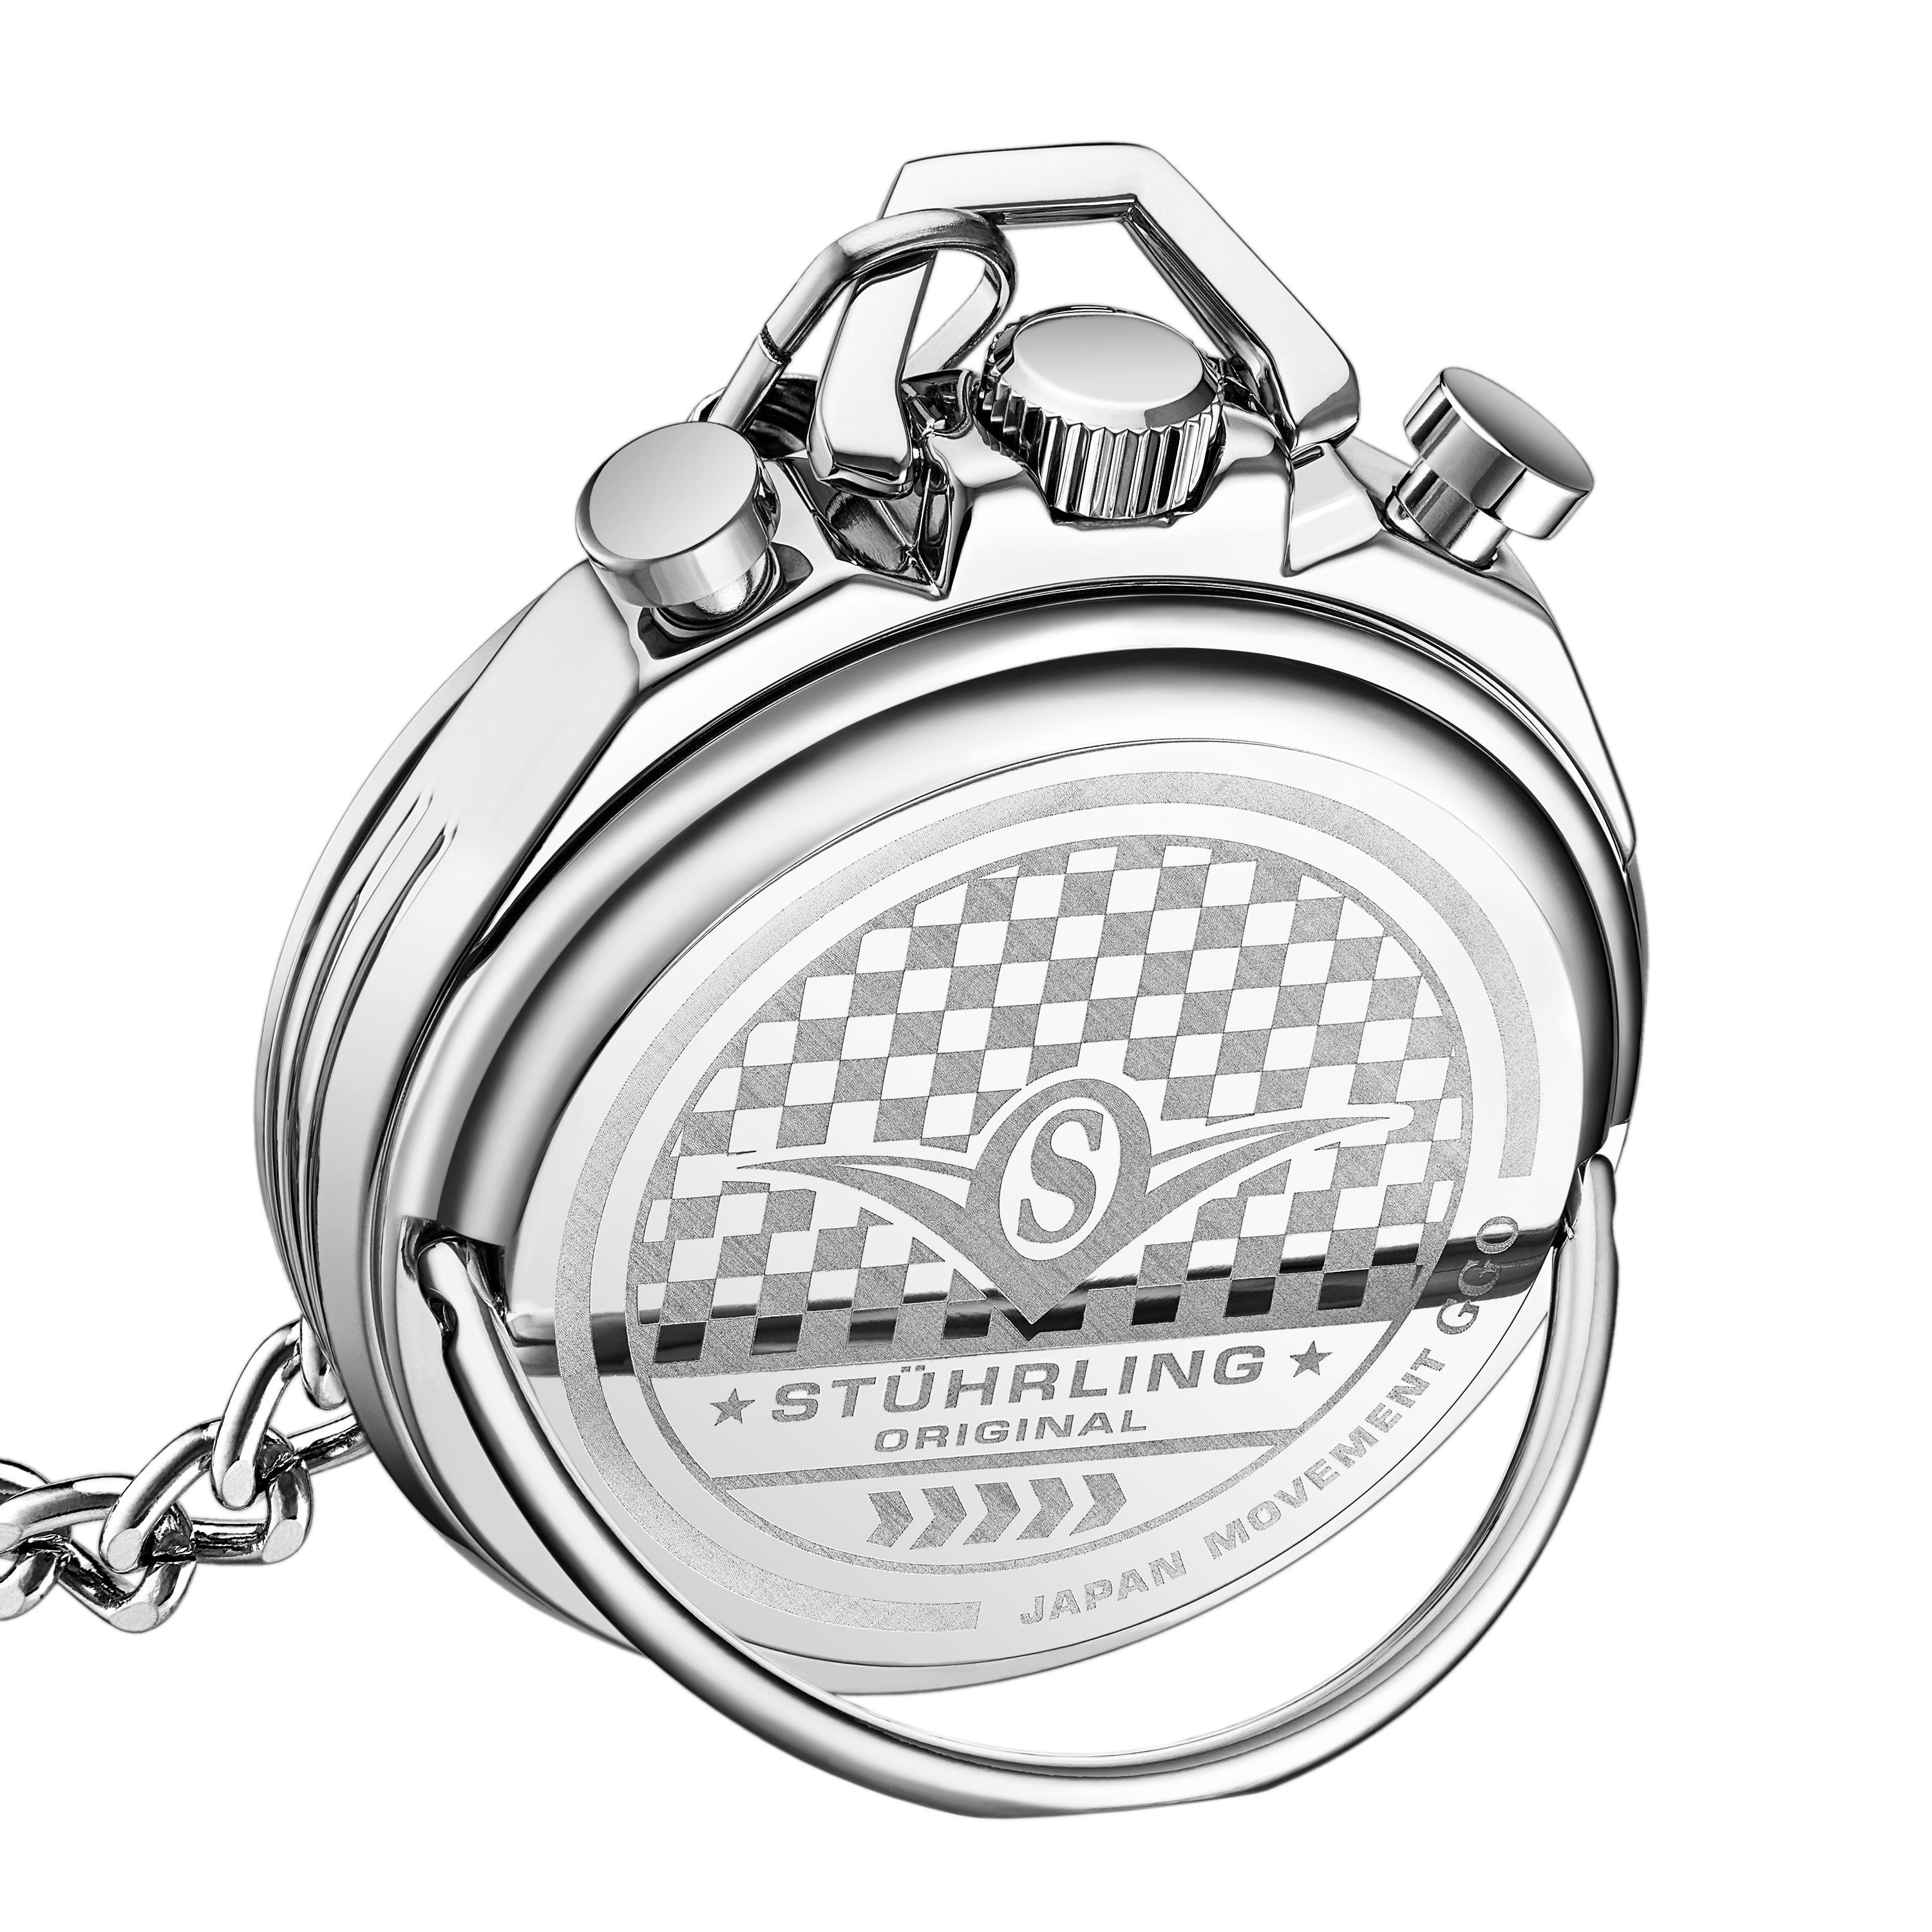 Men's Chrono Pocket Watch with stand, Silver Case, Silver Bezel, Blue Dial With Red Accents, Silver Luminous Hands And Markers